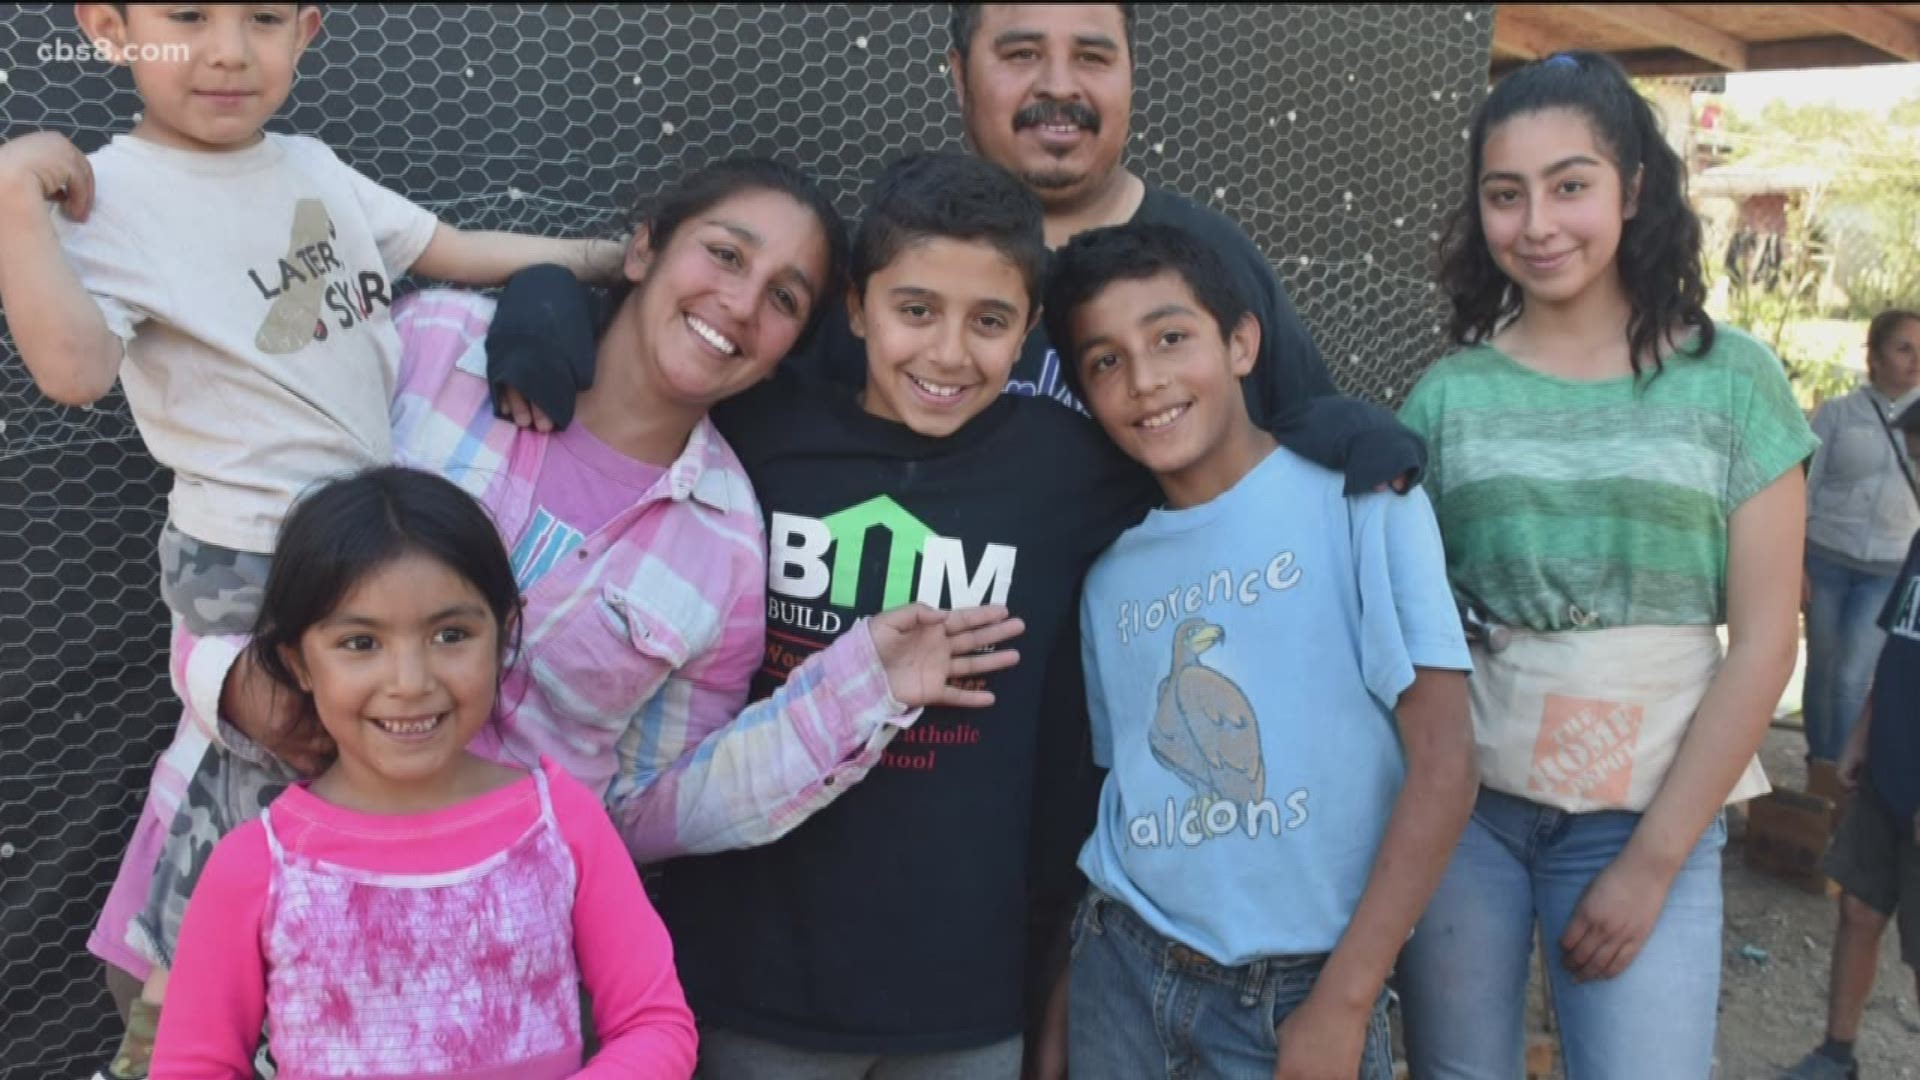 For most San Diego kids, school is out for summer but that doesn’t mean everyone is taking it easy. Over the next few months, a group of local kids are fundraising to help build homes in Mexico.